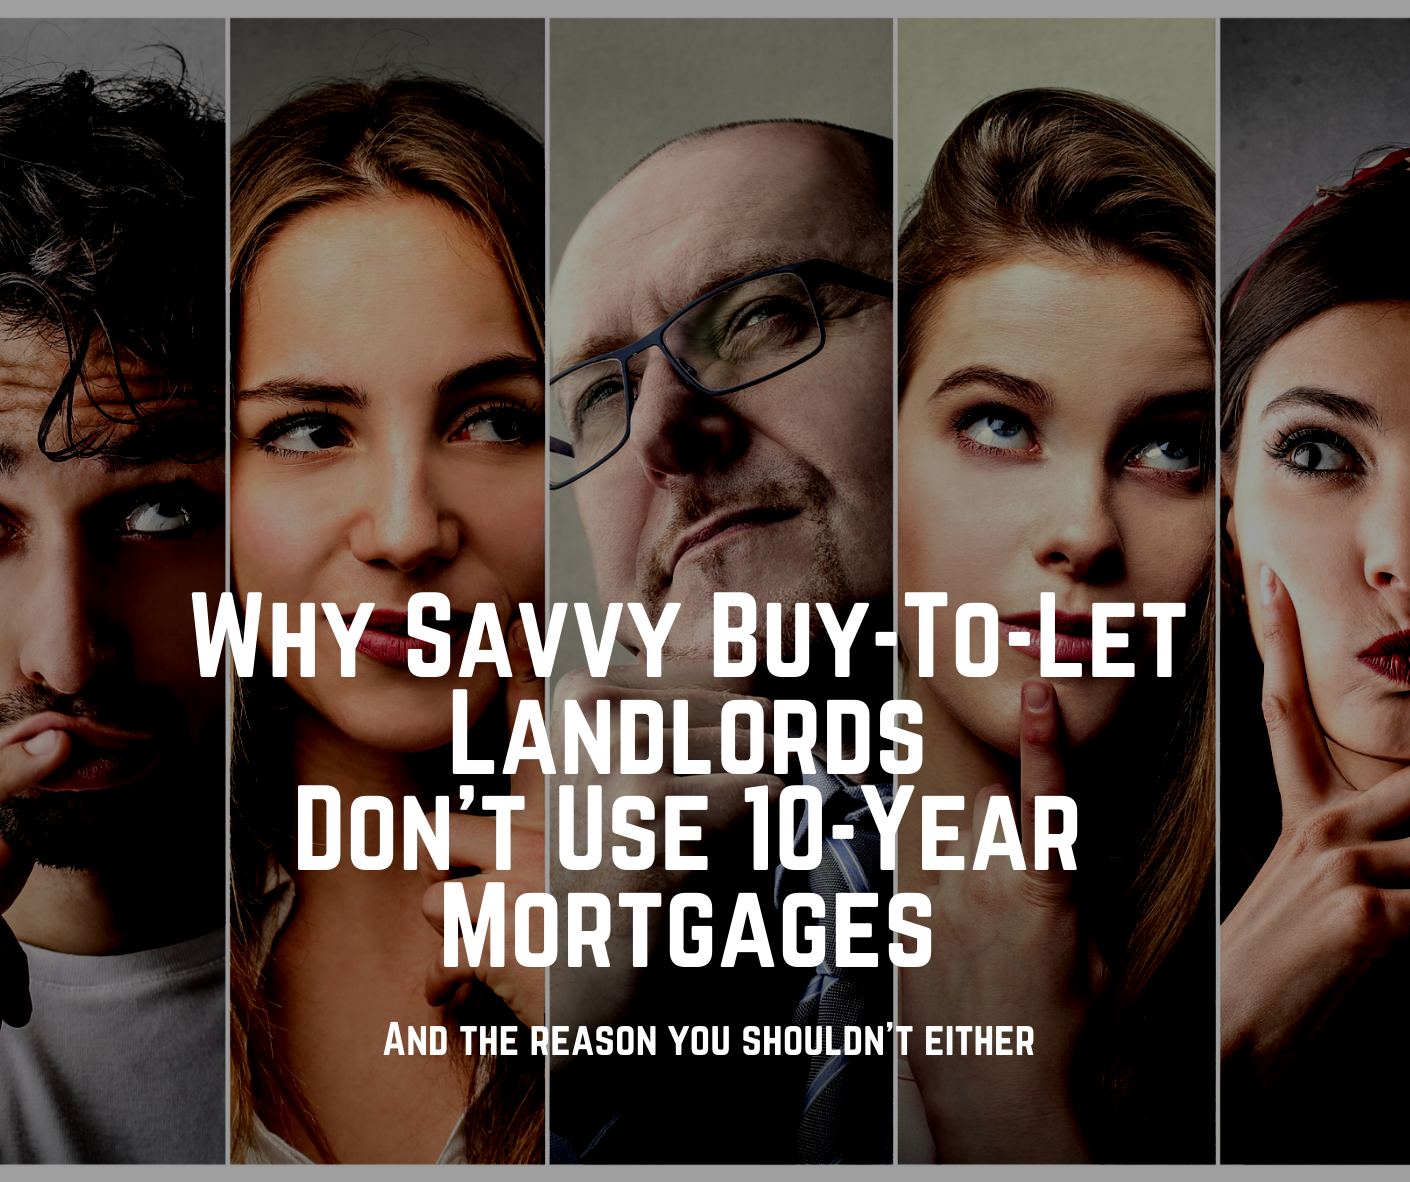 WHY SAVVY ISLEWORTH BUY-TO-LET LANDLORDS DON’T USE 10-YEAR MORTGAGES AND THE REASON YOU SHOULDN’T EITHER